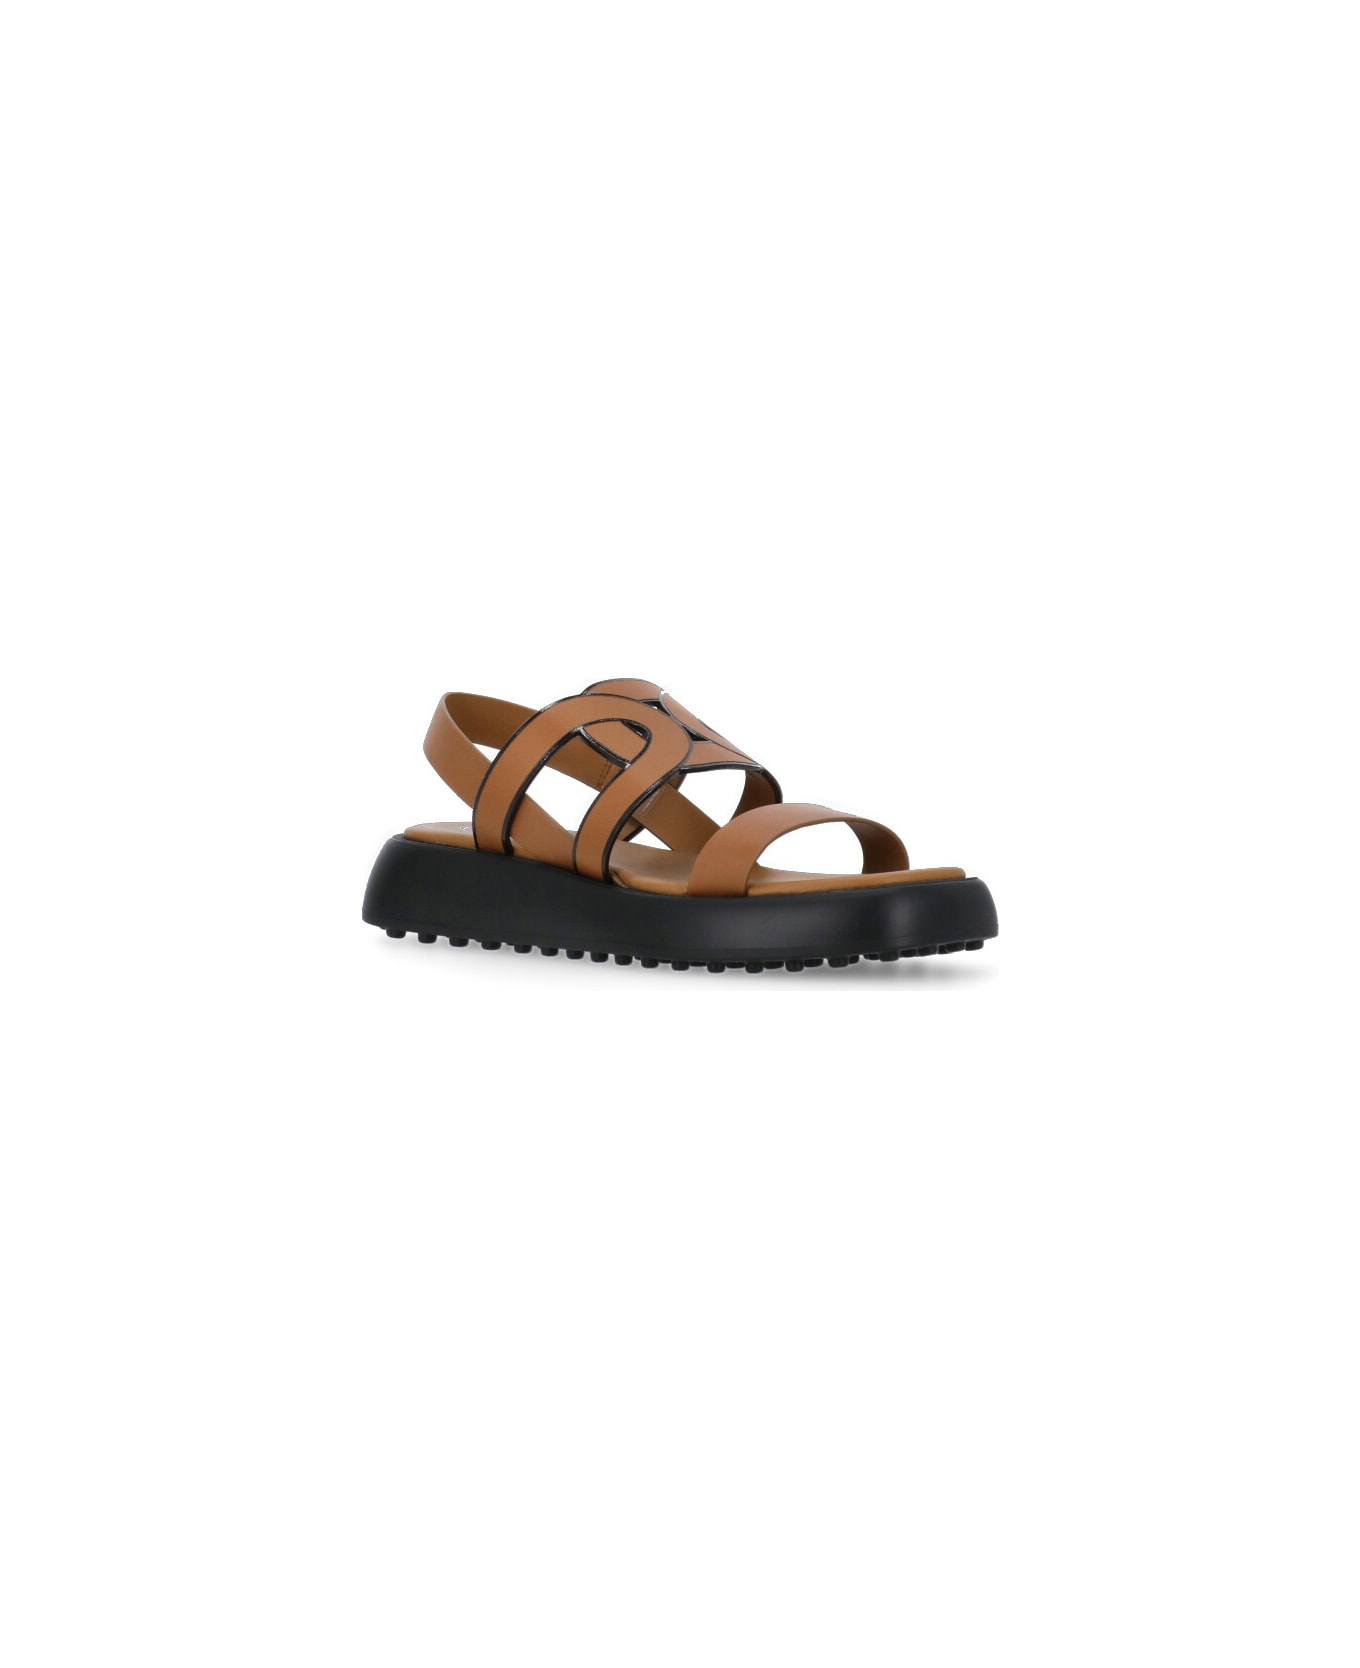 Tod's Leather Sandals - Brown